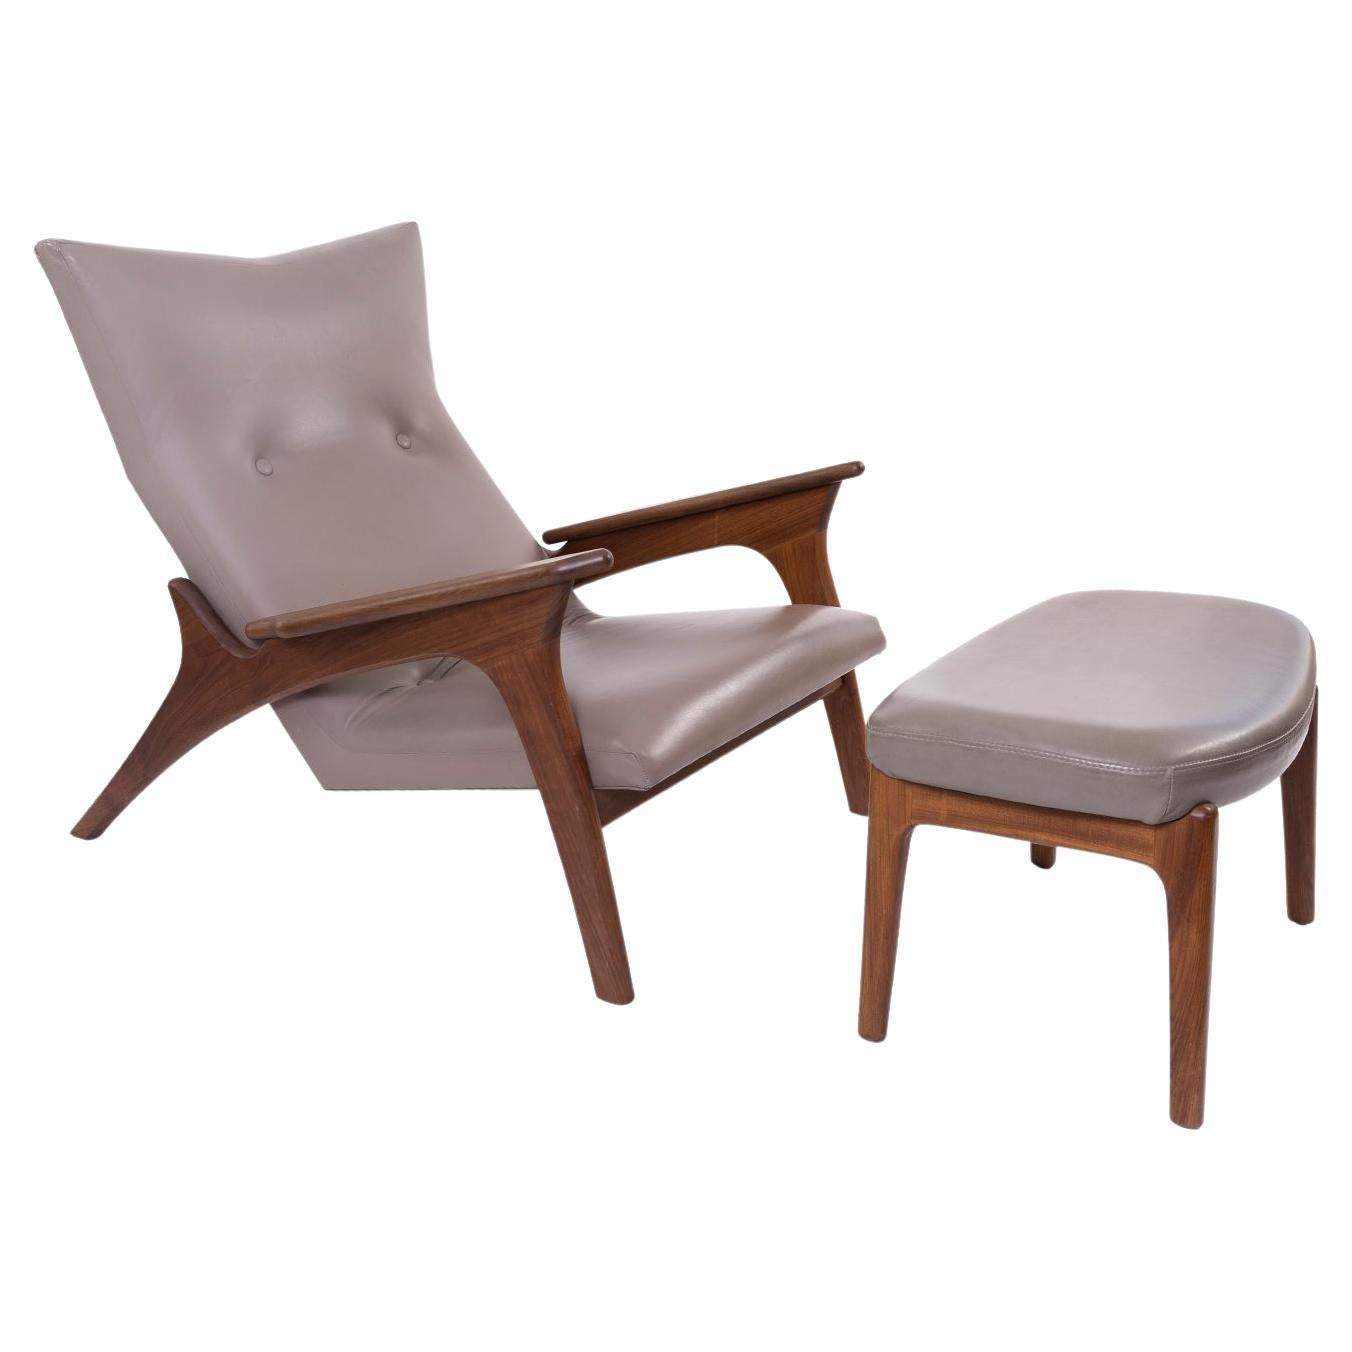 Sculptural Lounge Chair & Ottoman by Adrian Pearsall, 1970's For Sale